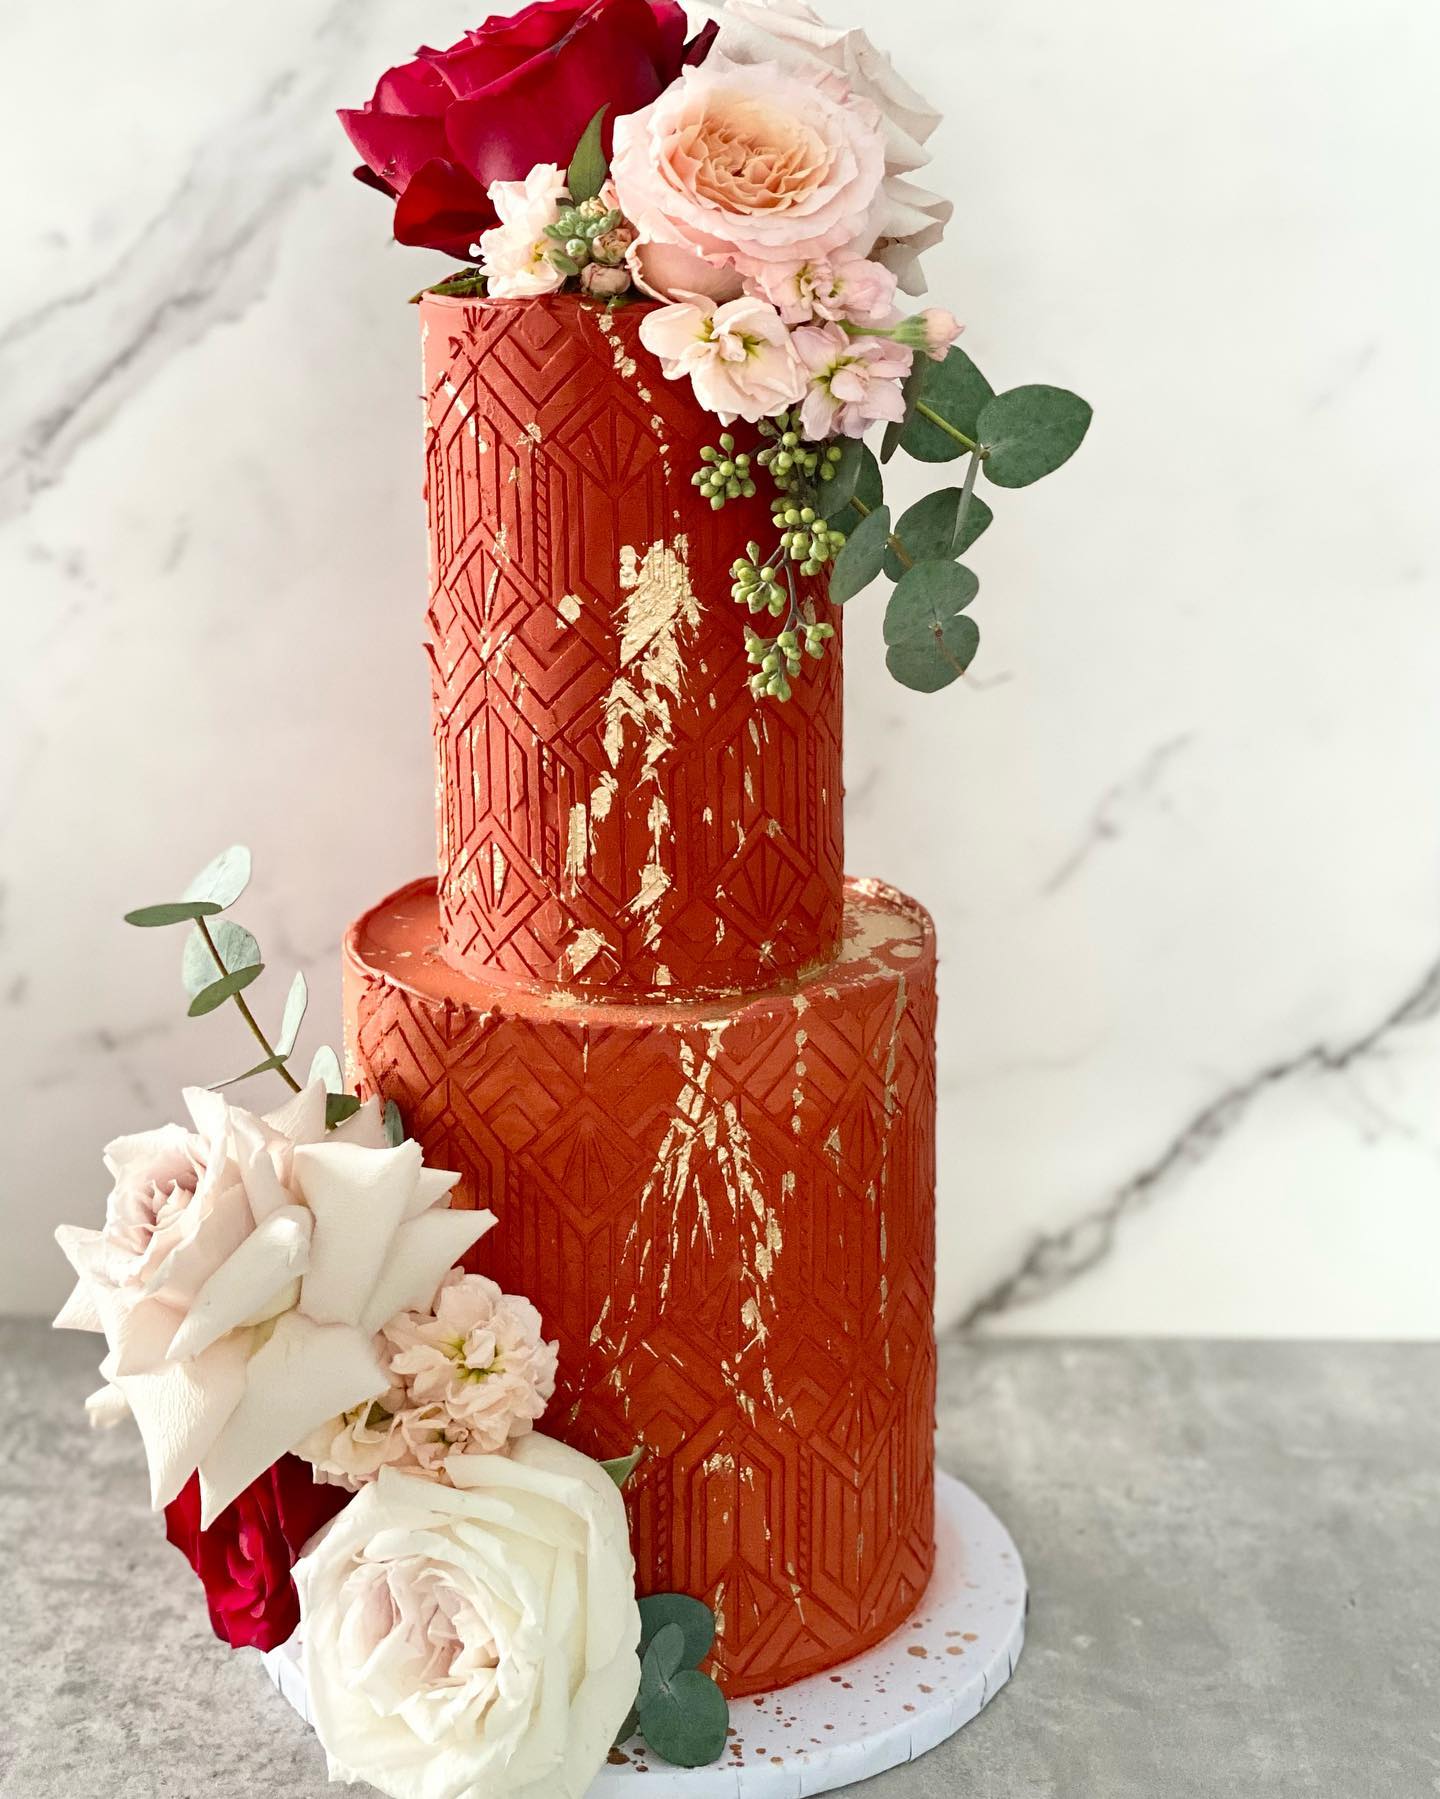 Red stencilled wedding cake with roses